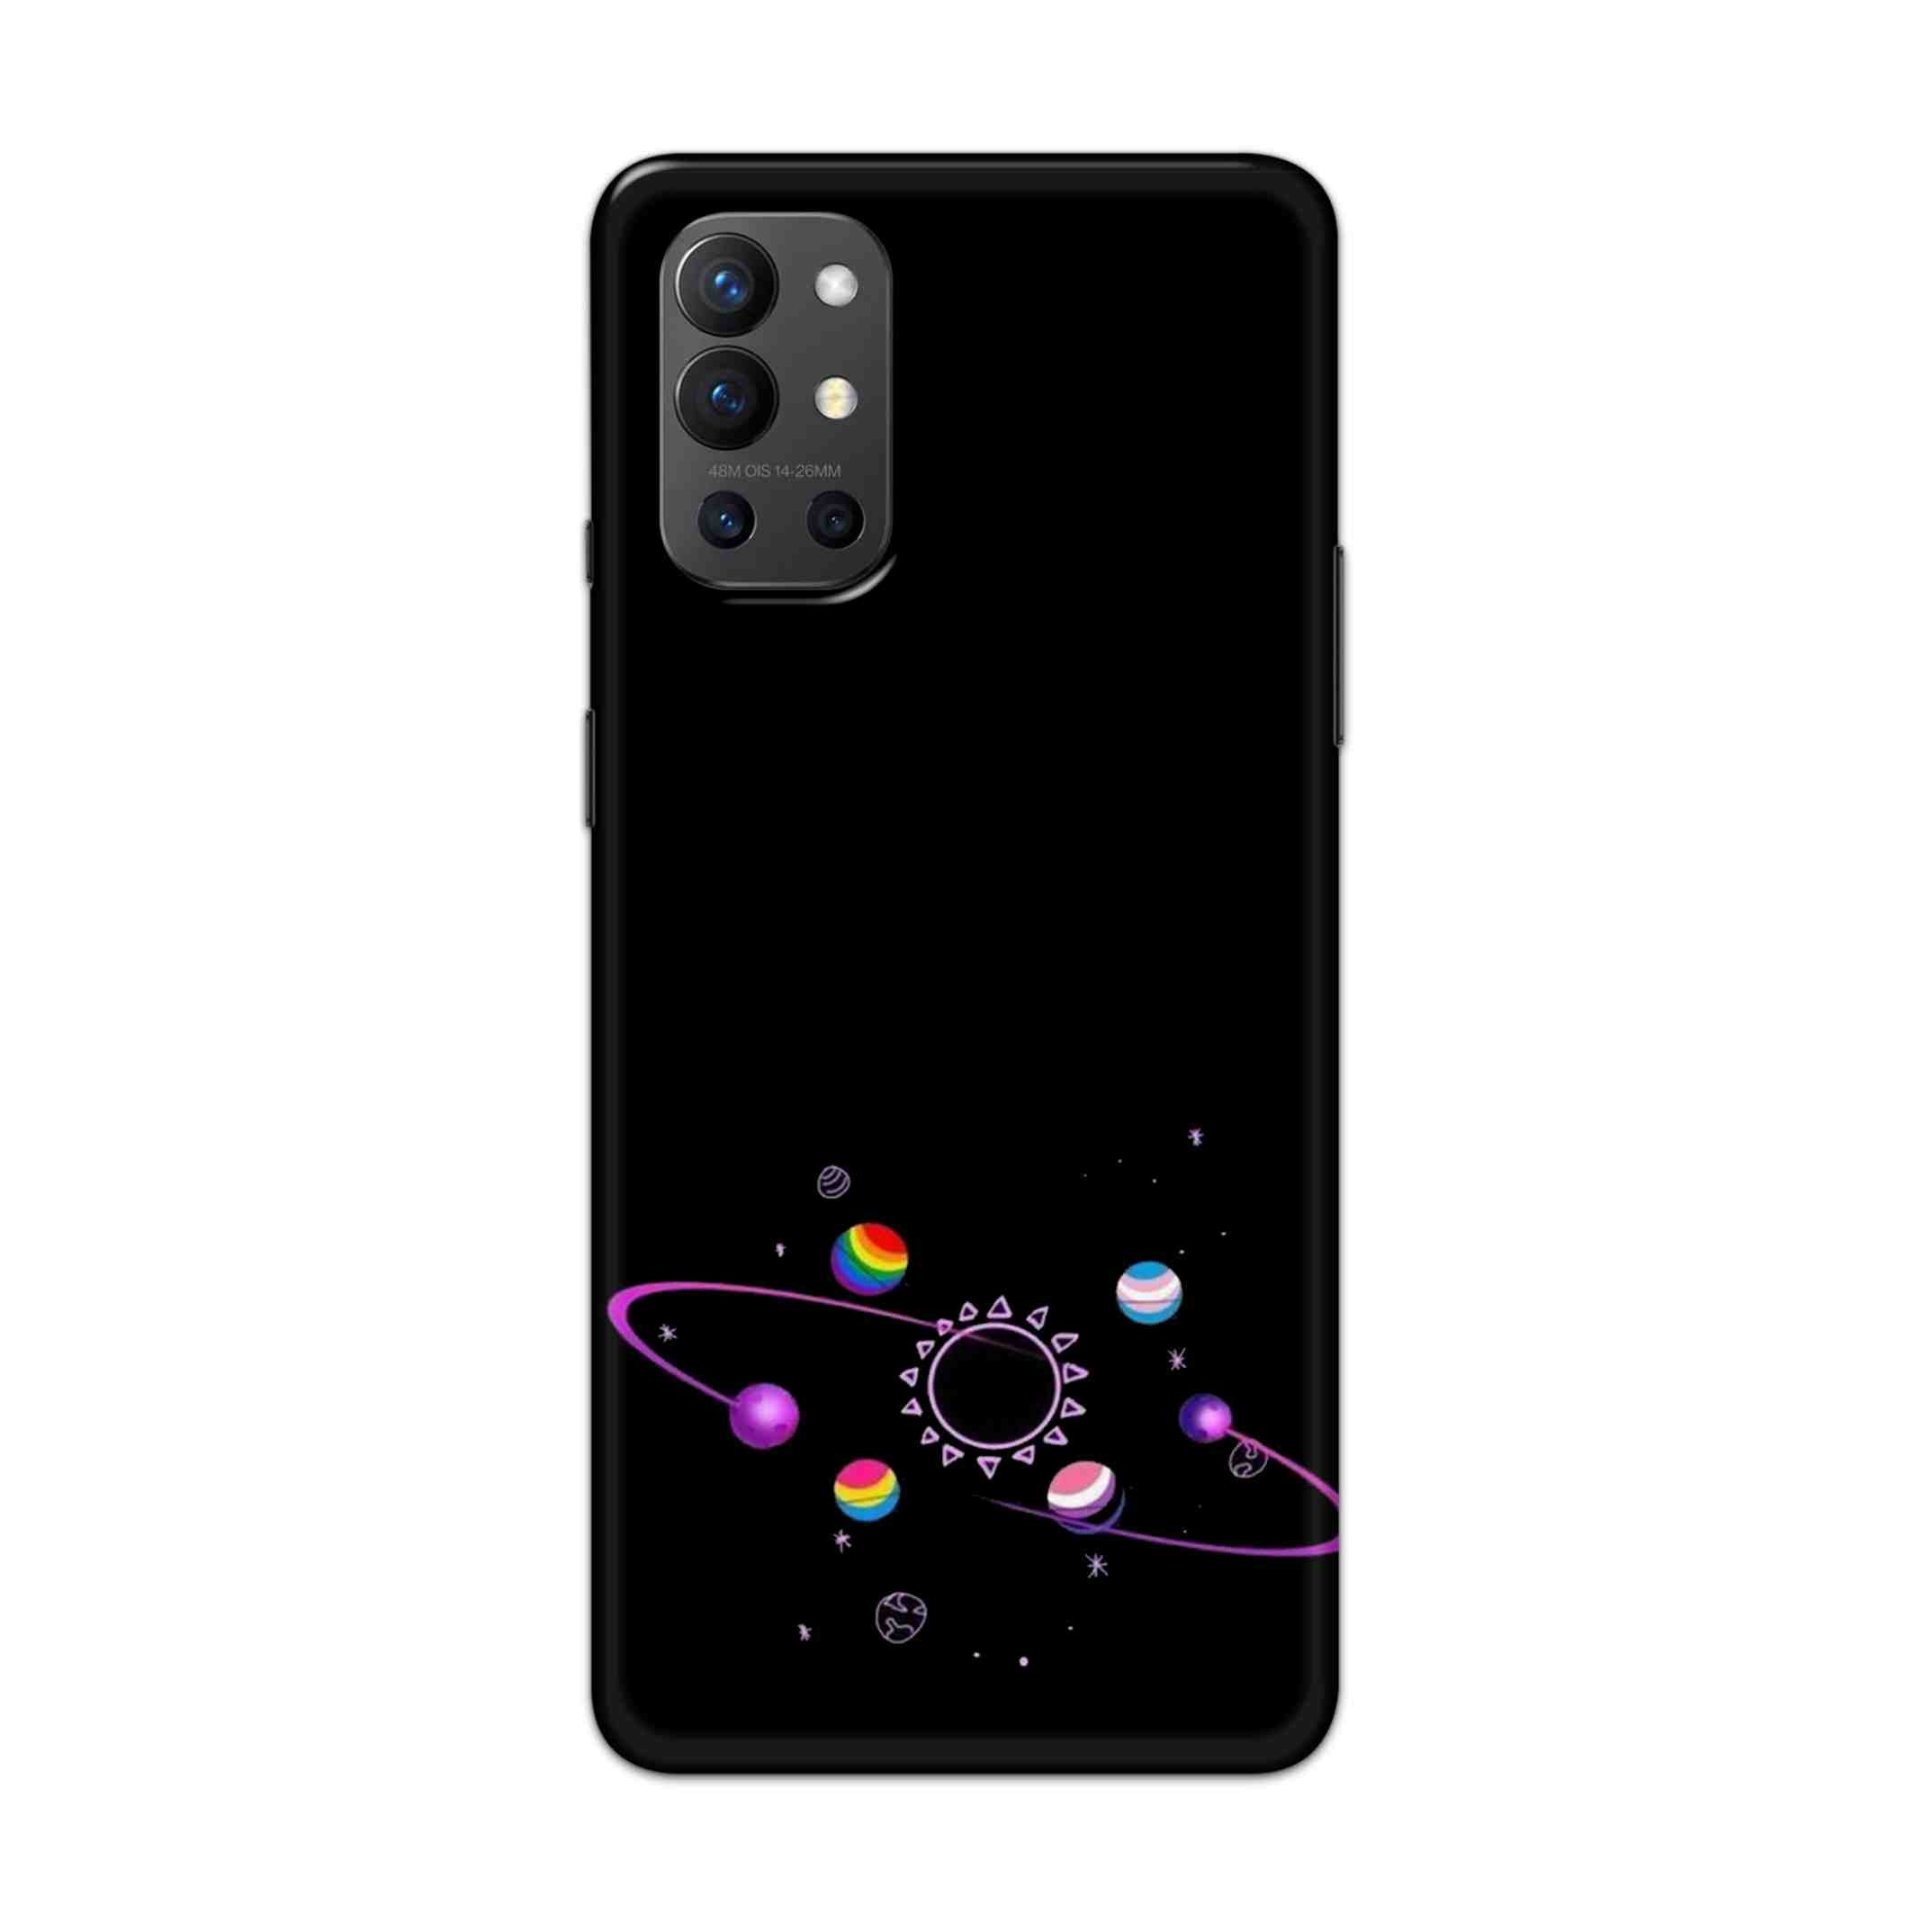 Buy Galaxy Hard Back Mobile Phone Case Cover For OnePlus 9R / 8T Online